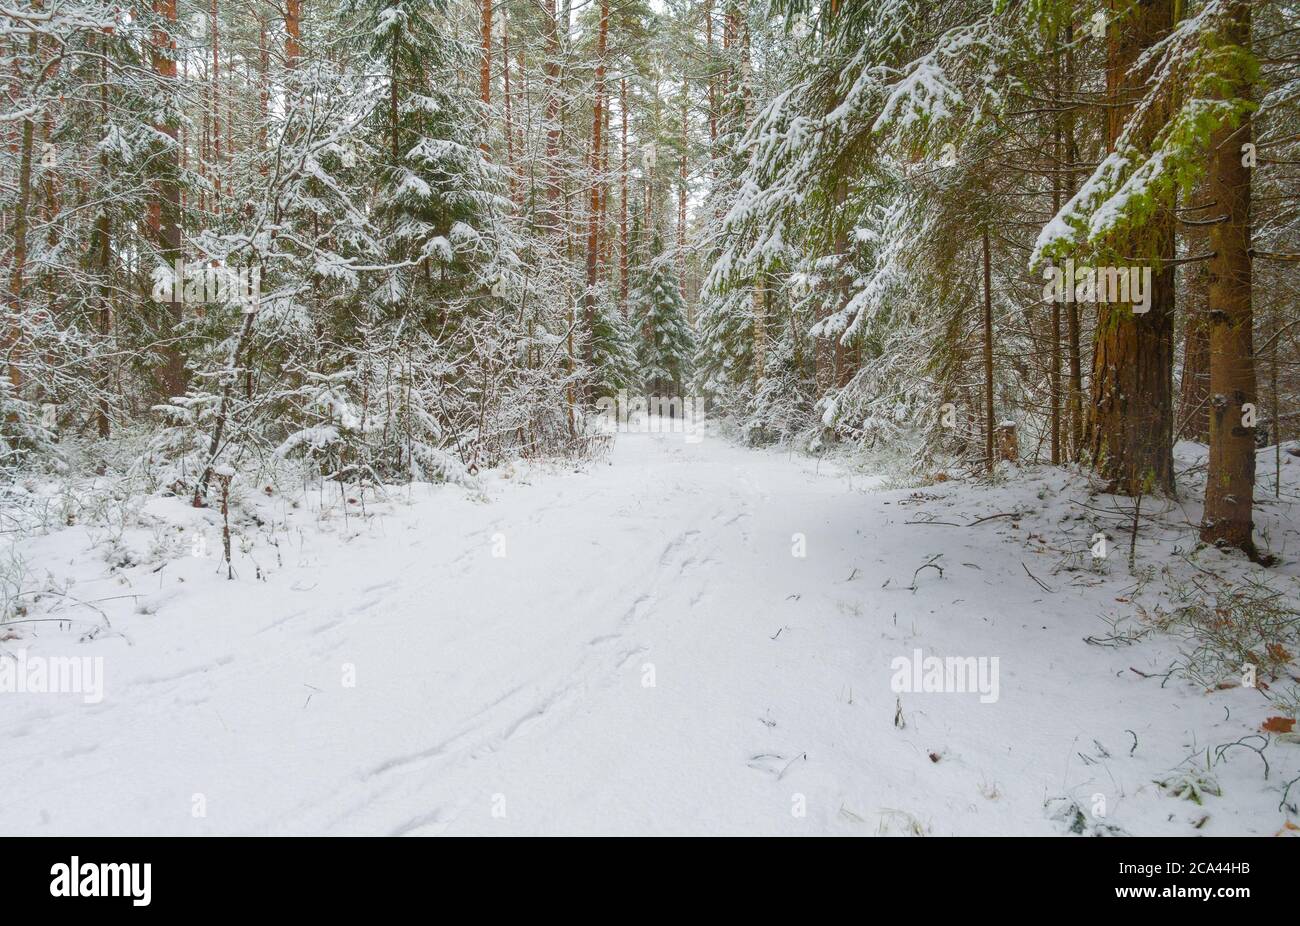 Road through beautiful winter forest, fresh snow on trees. Stock Photo